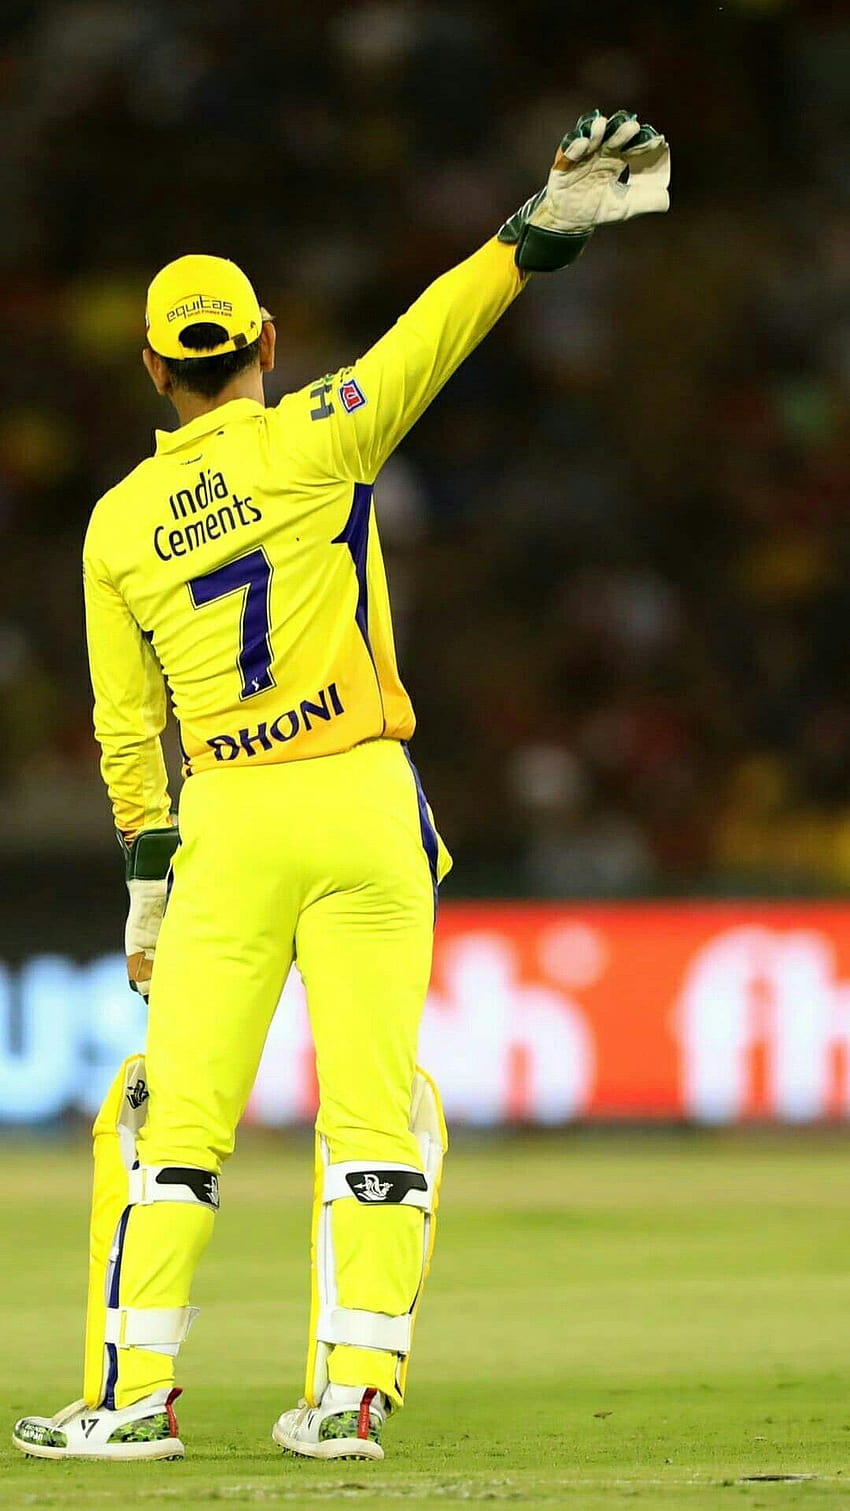 Csk Resolution For Iphone on Hupages, if you like it dont forget save it or…, msd csk HD phone wallpaper